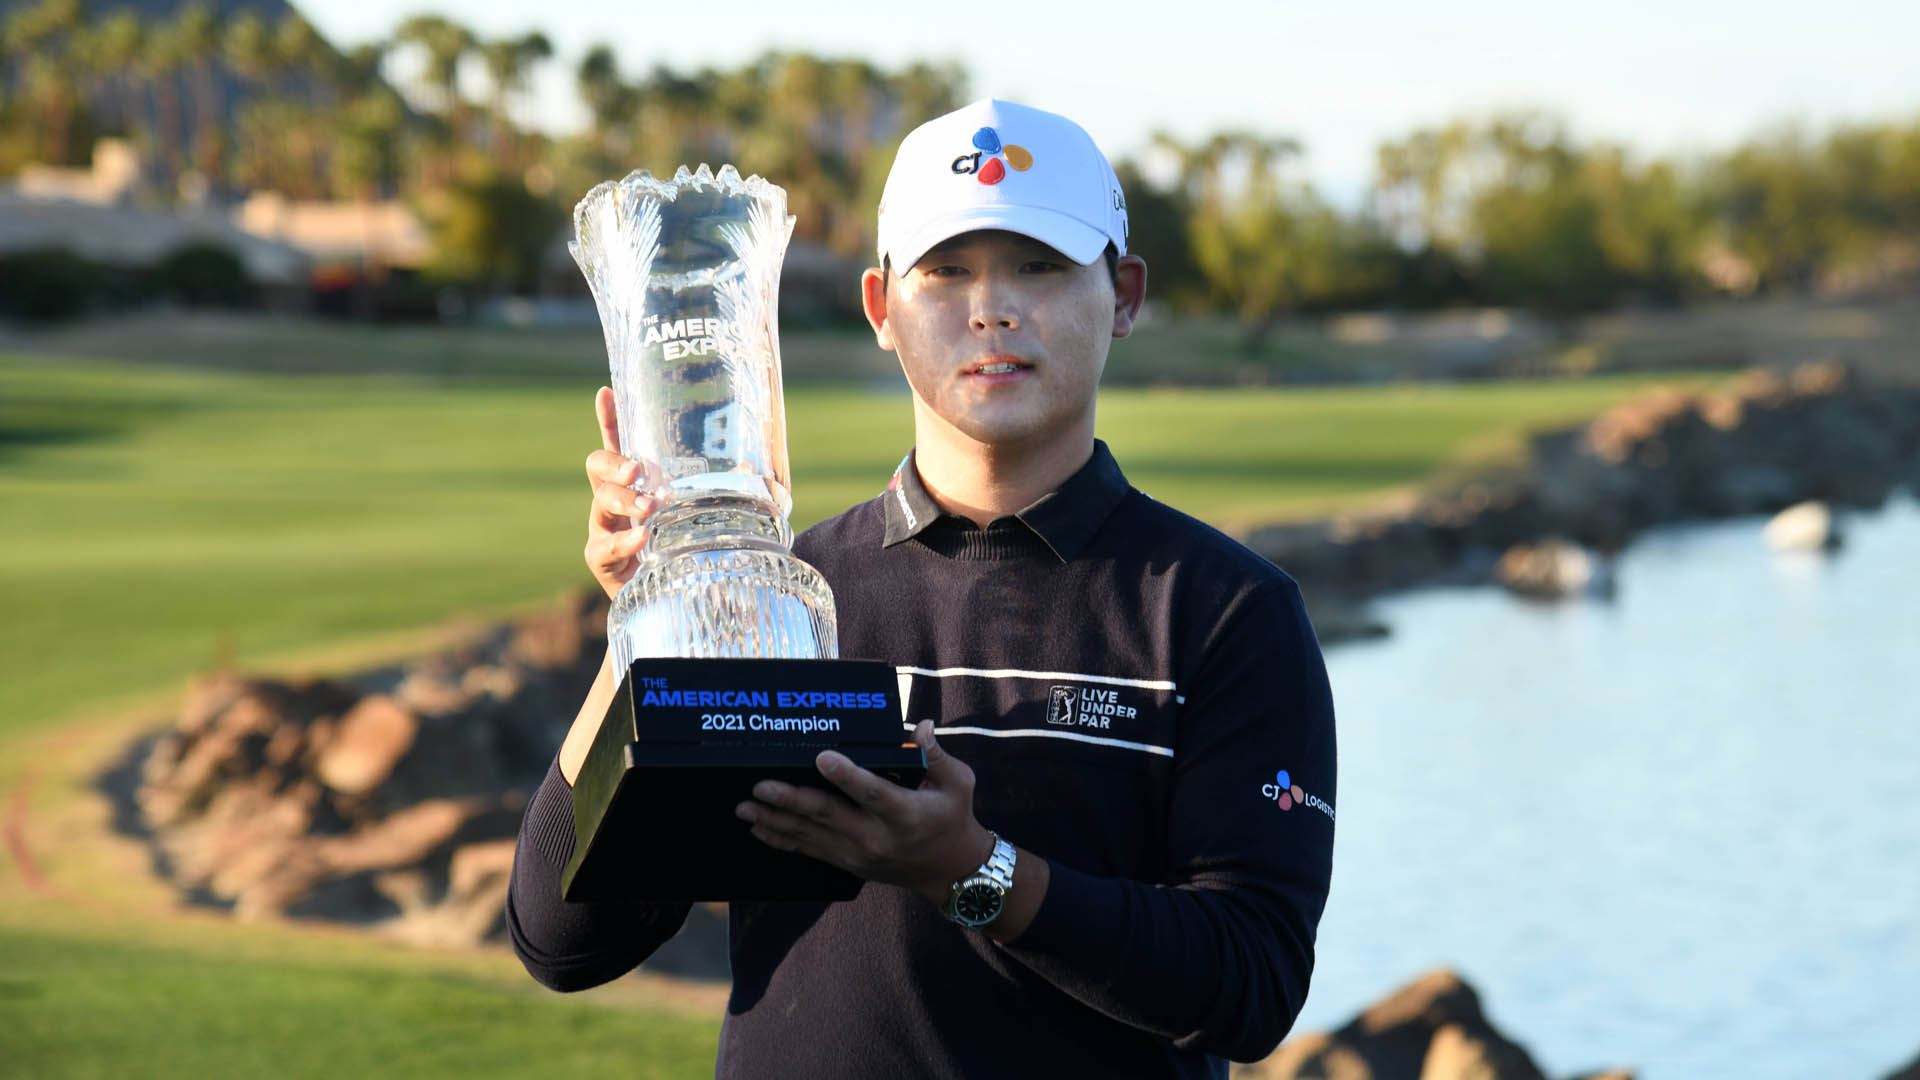 Siwoo Kim, won the championship in 3 years and 8 months…  3 wins in PGA career